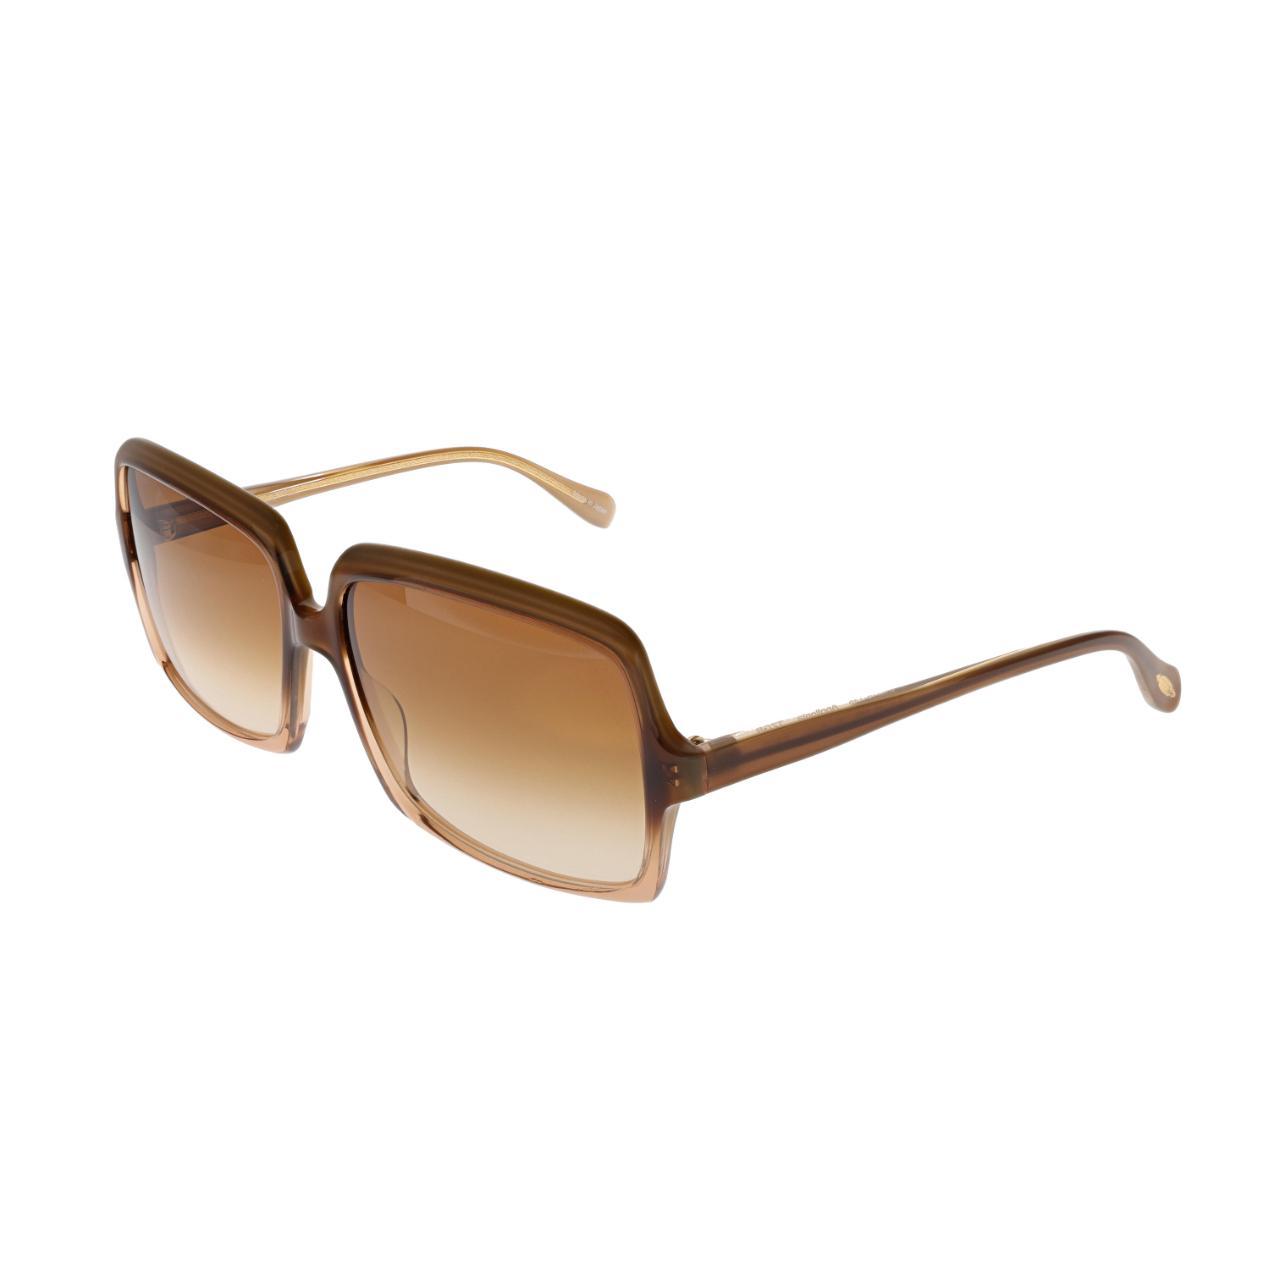 Product Image 1 - OLIVER PEOPLES APOLLONIA SUNGLASSES

Oliver Peoples